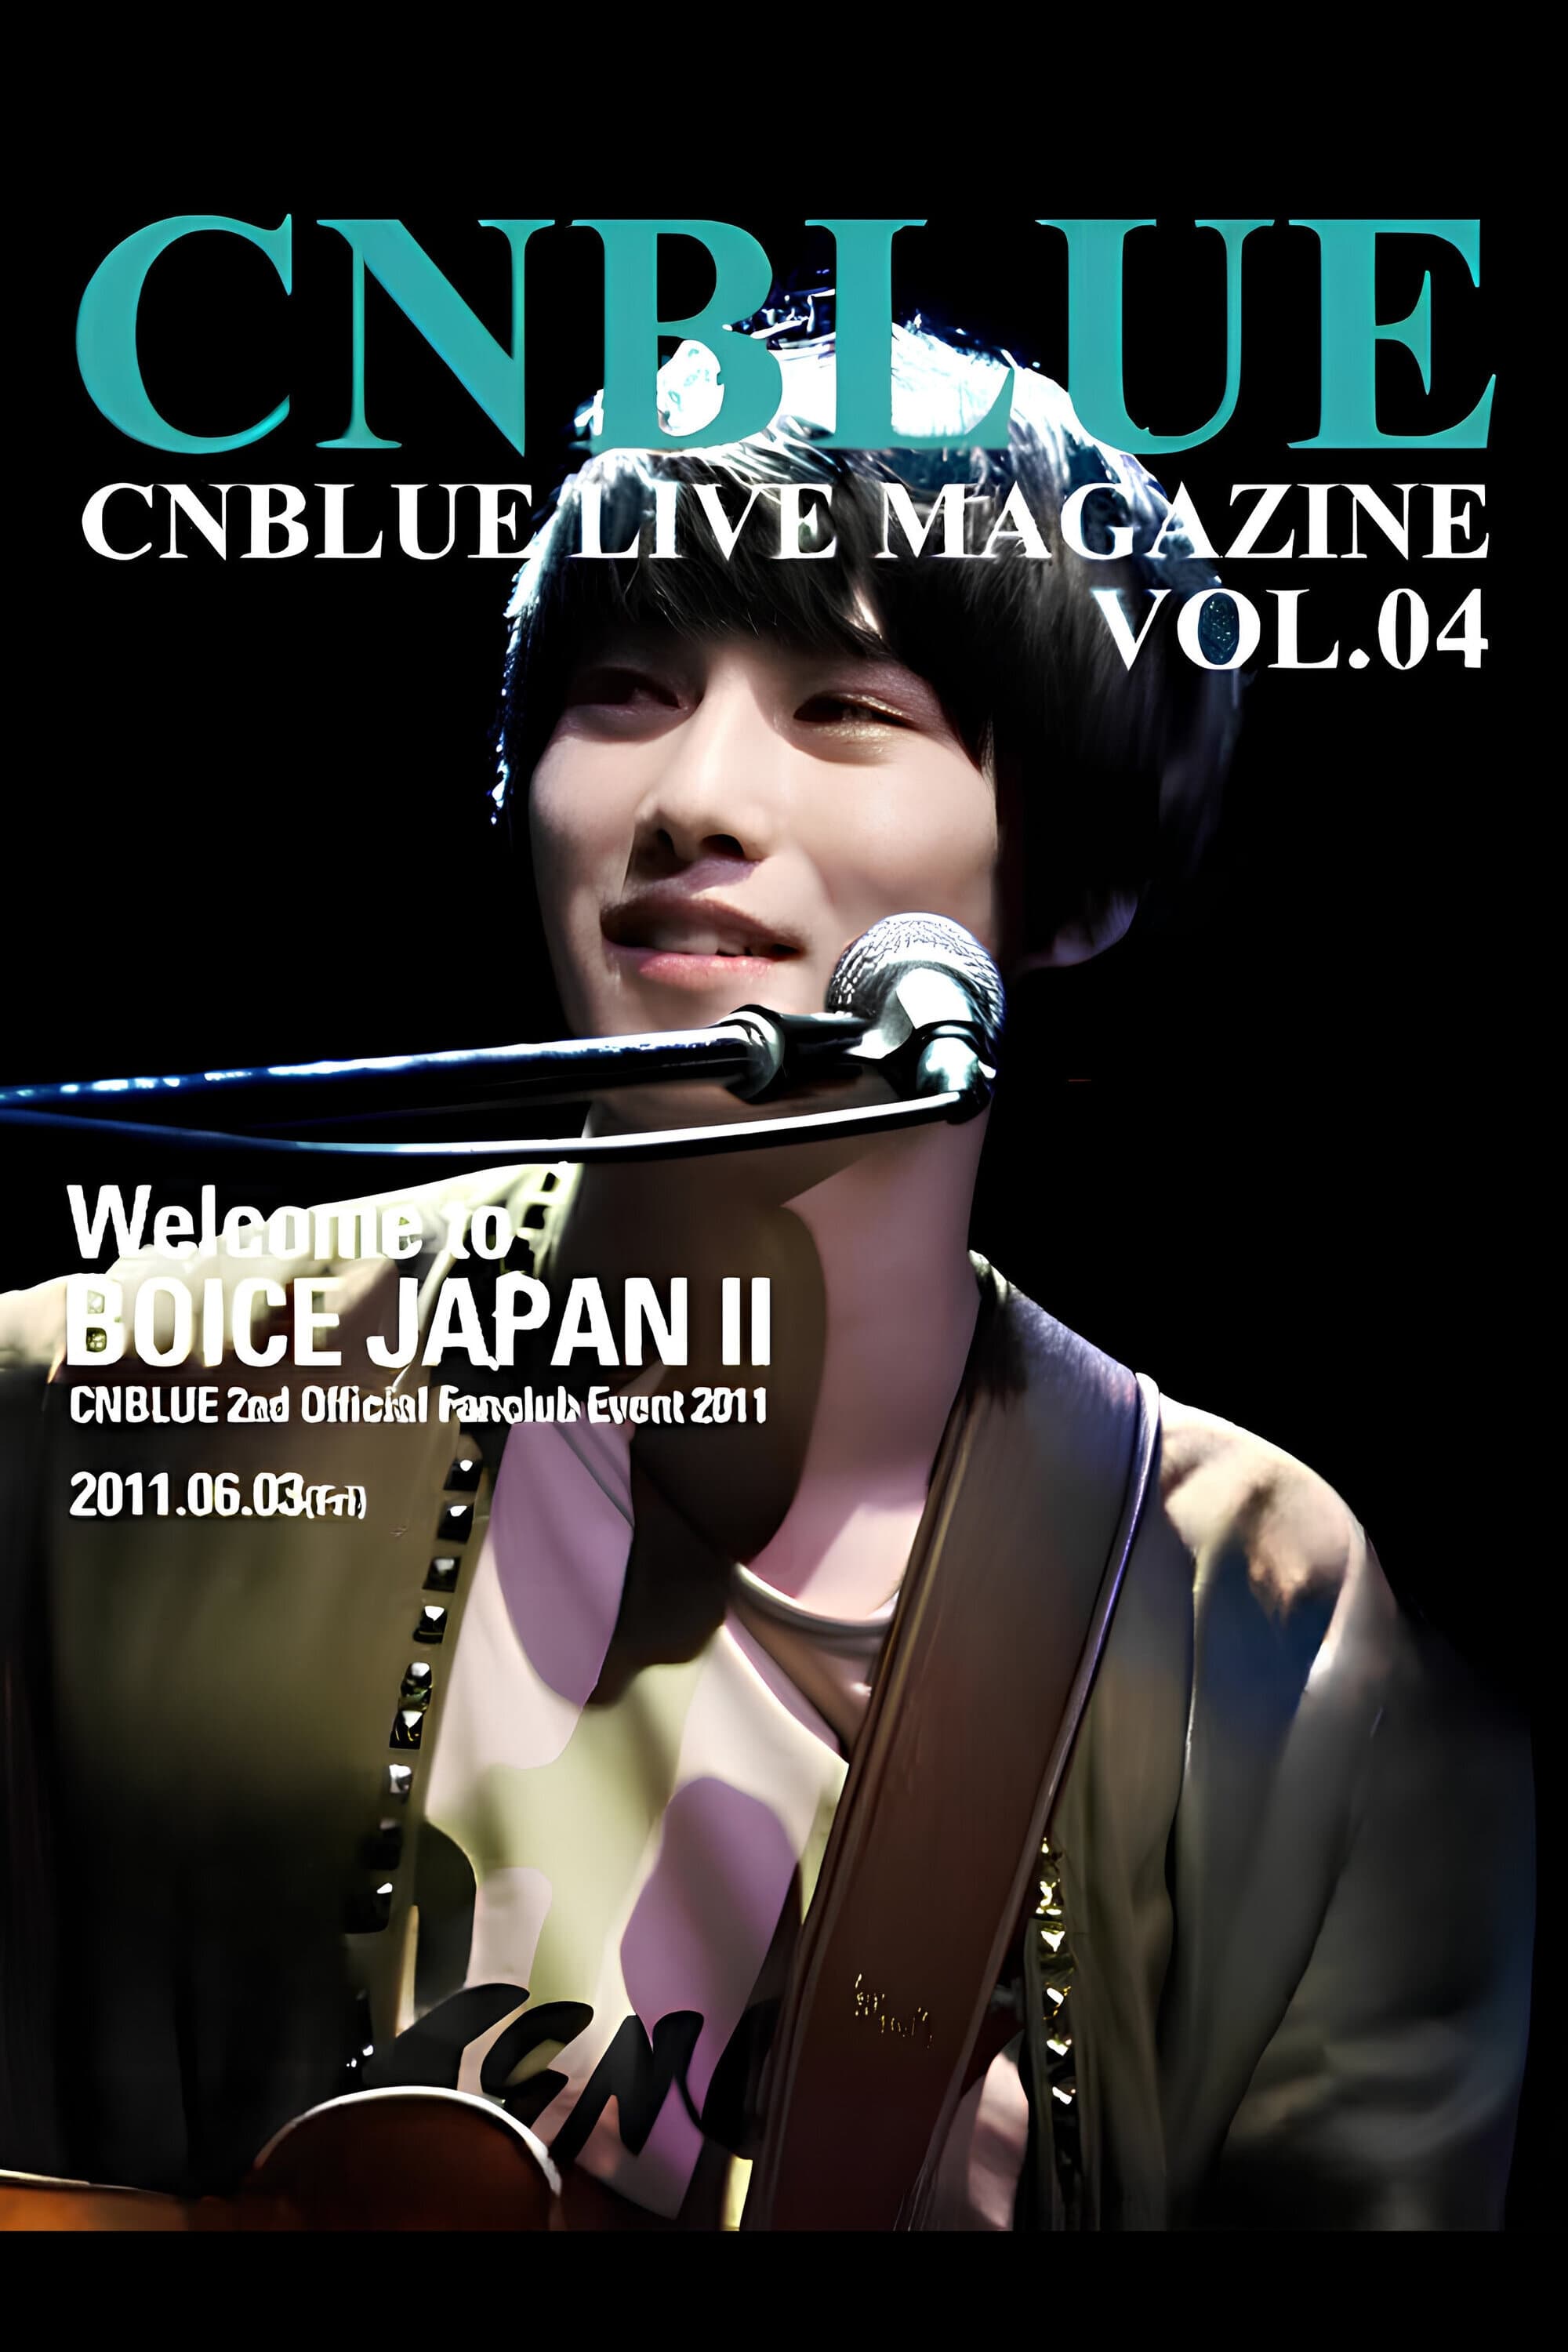 CNBLUE 2nd Official Fanclub Event 2011~ Welcome to BOICE JAPAN II ~